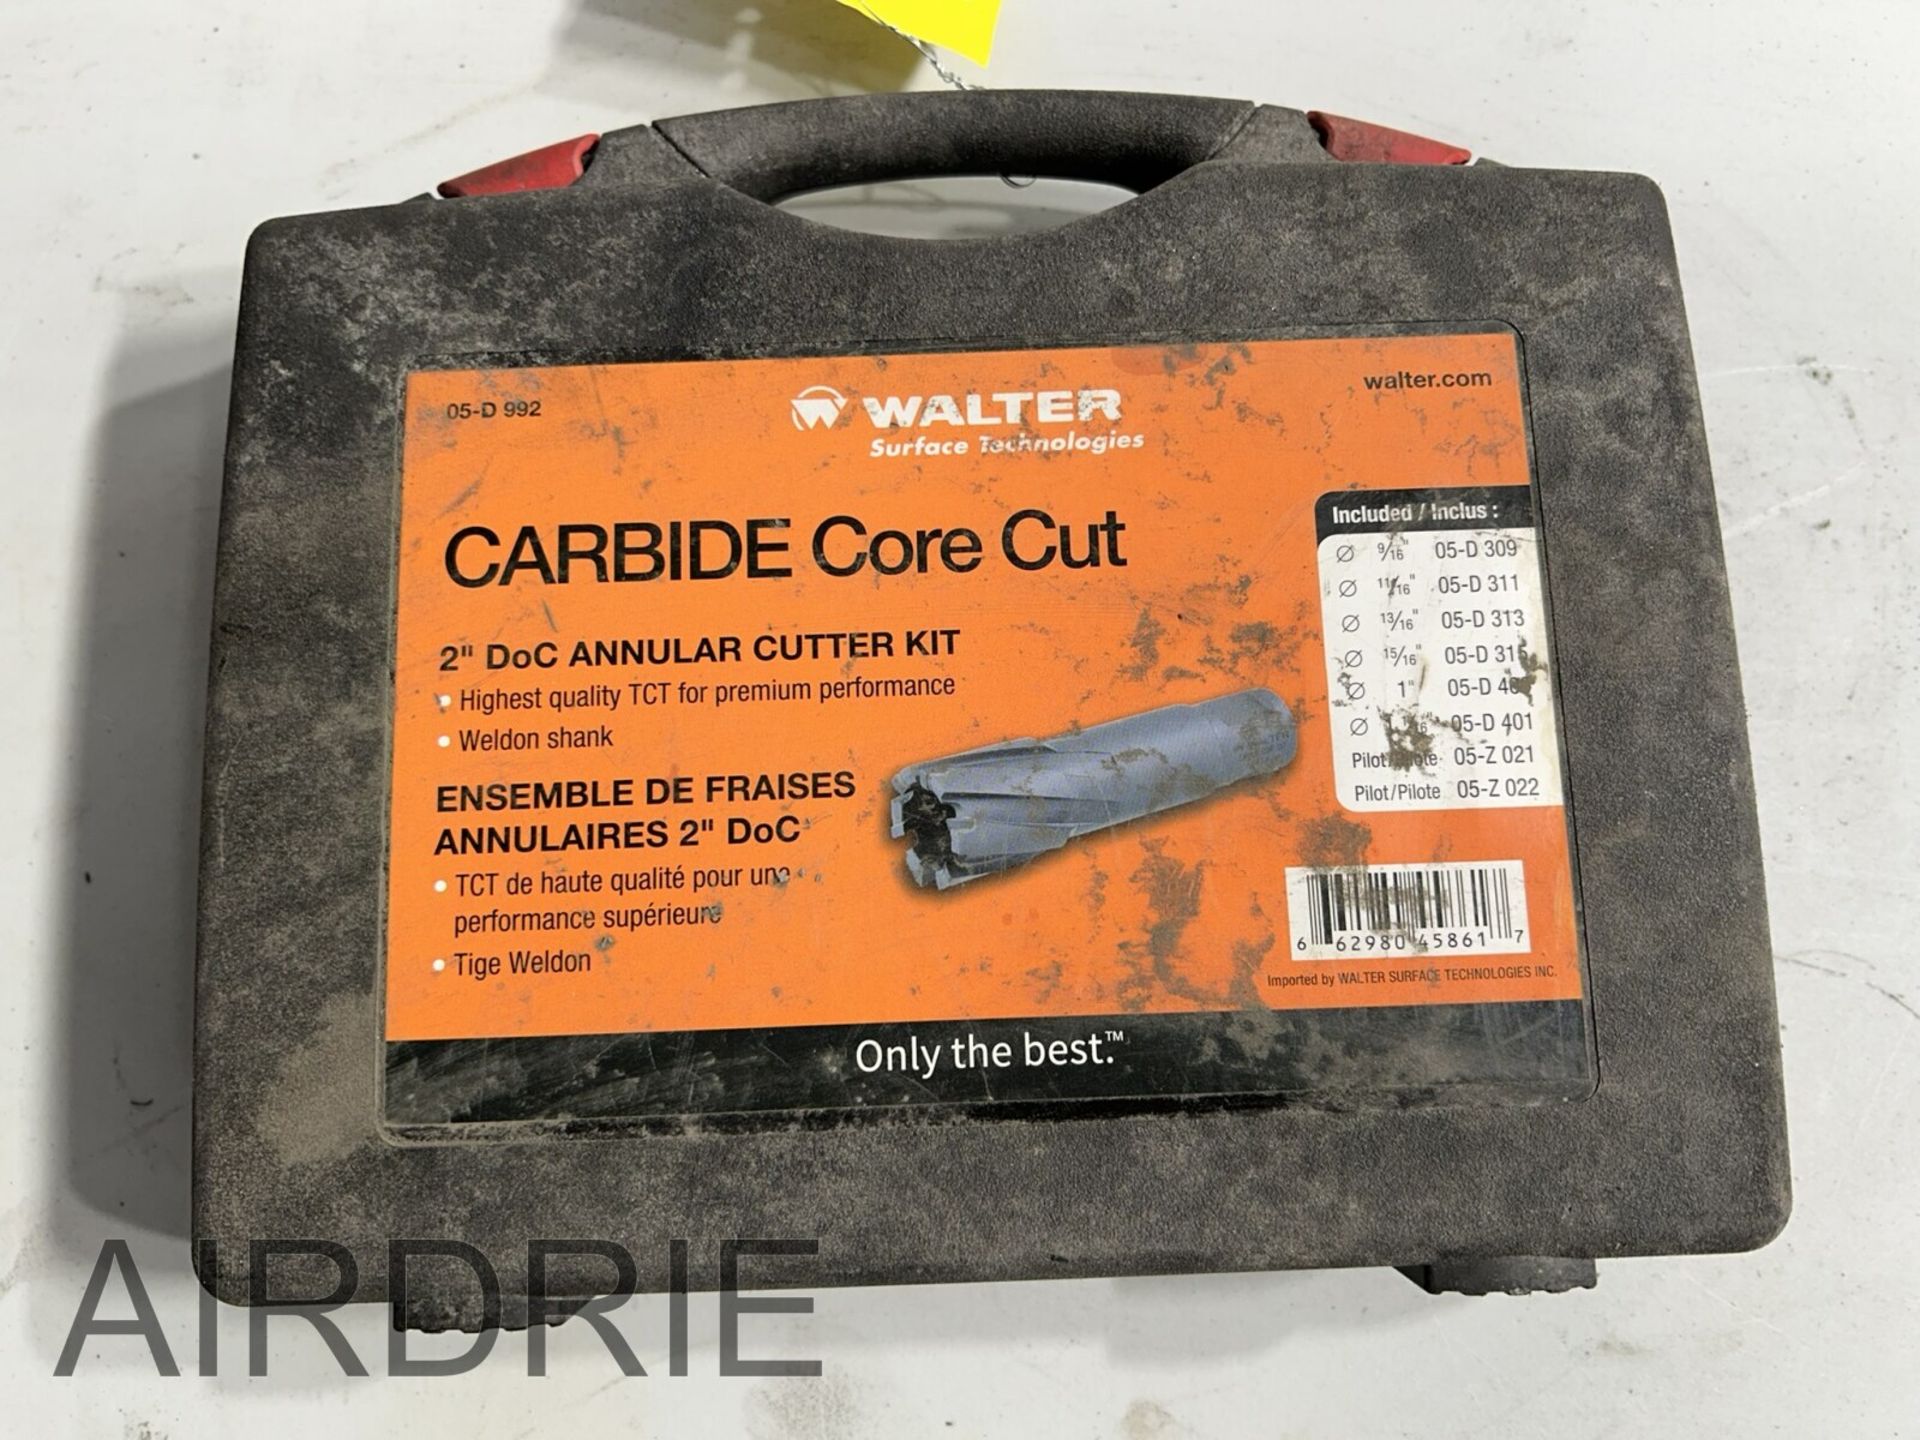 *OFFSITE* WALTER CARBIDE CORE CUT 2" ANNULAR CUTTER KIT - Image 3 of 3